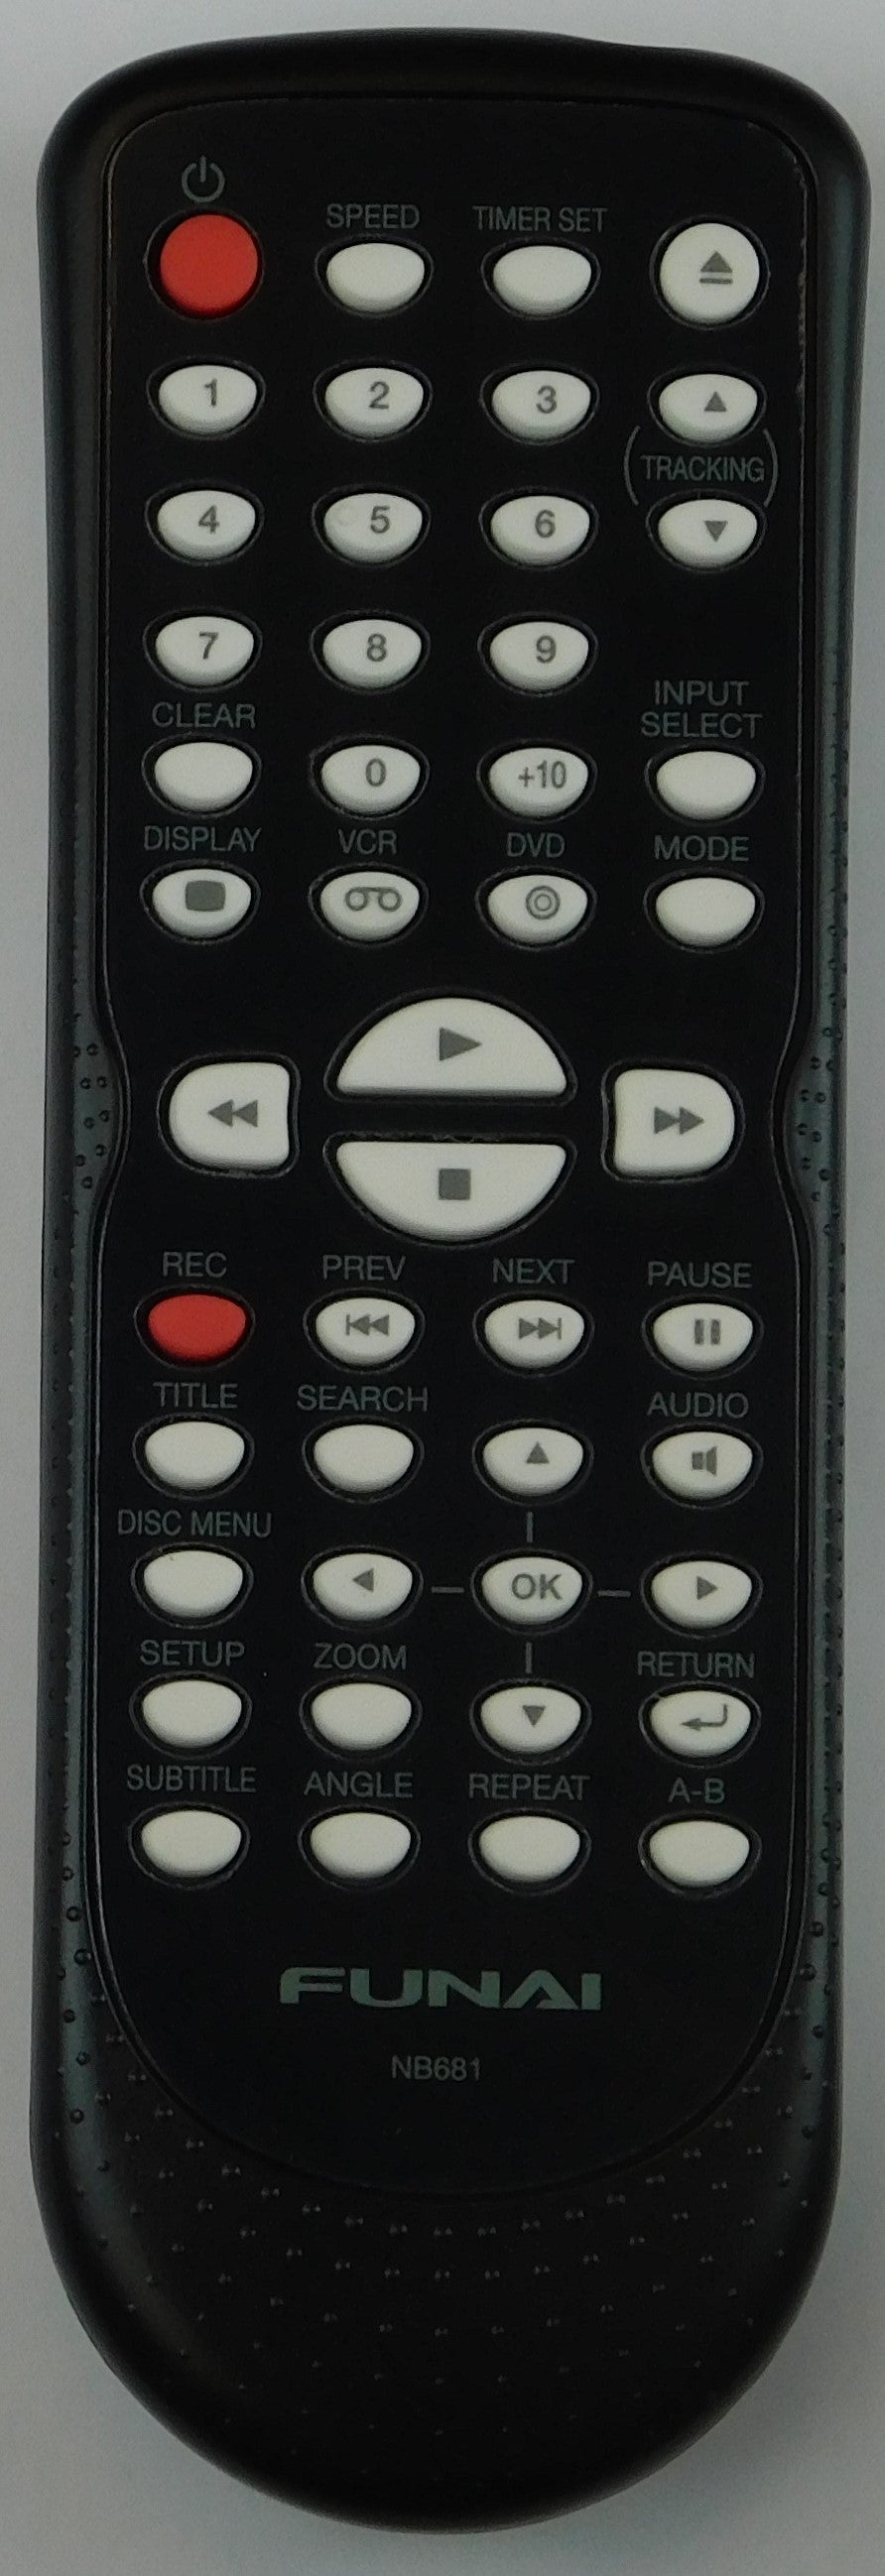 OEM replacement remote control for Funai DVD & VCR Players NB681UD